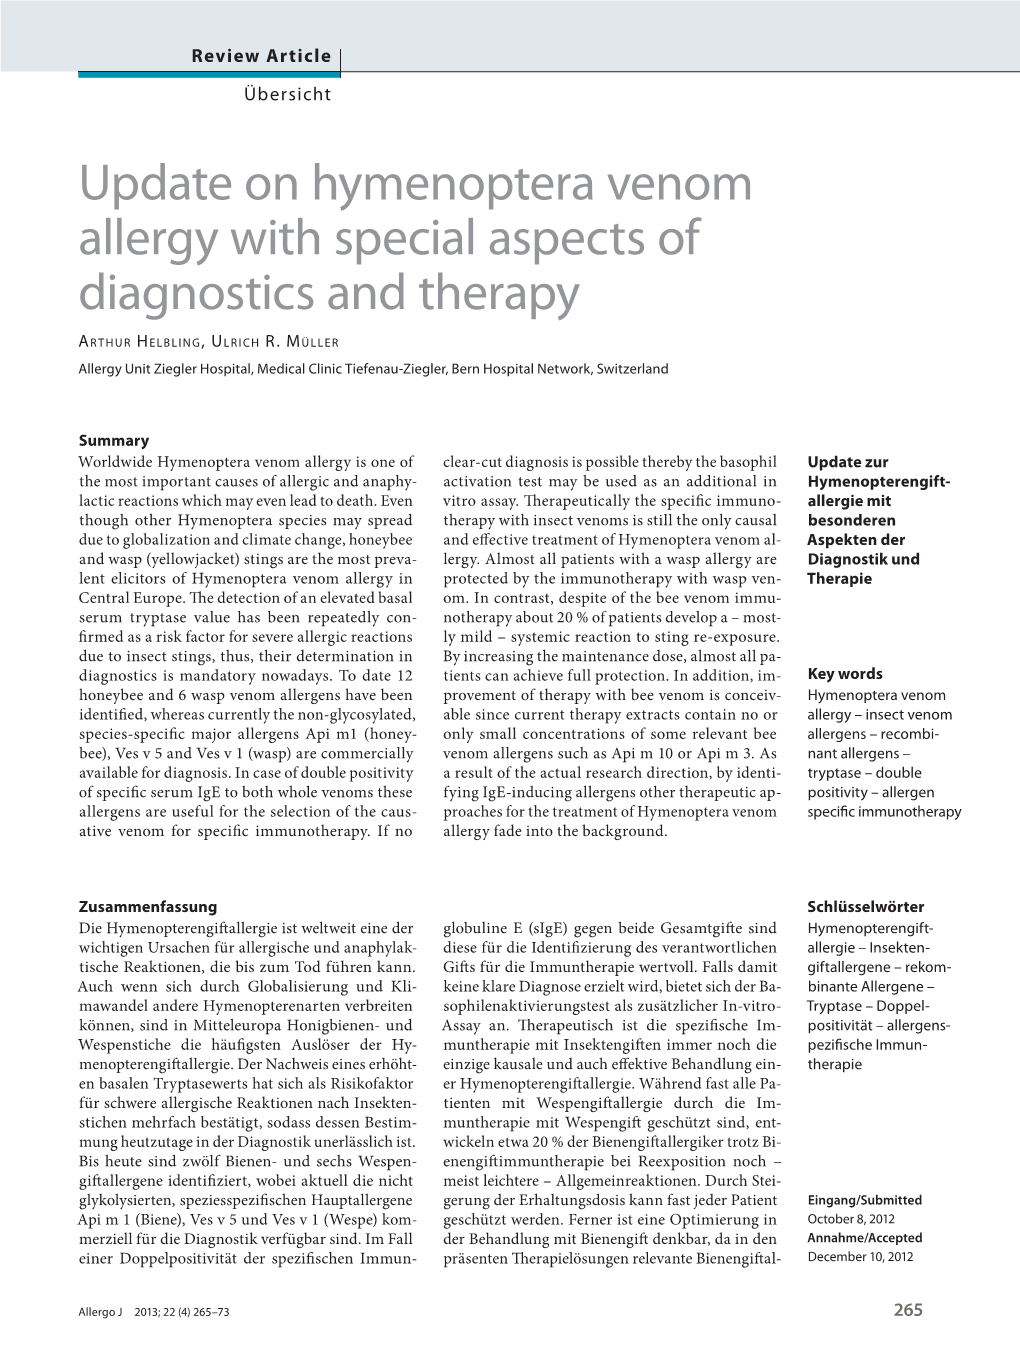 Update on Hymenoptera Venom Allergy with Special Aspects of Diagnostics and Therapy